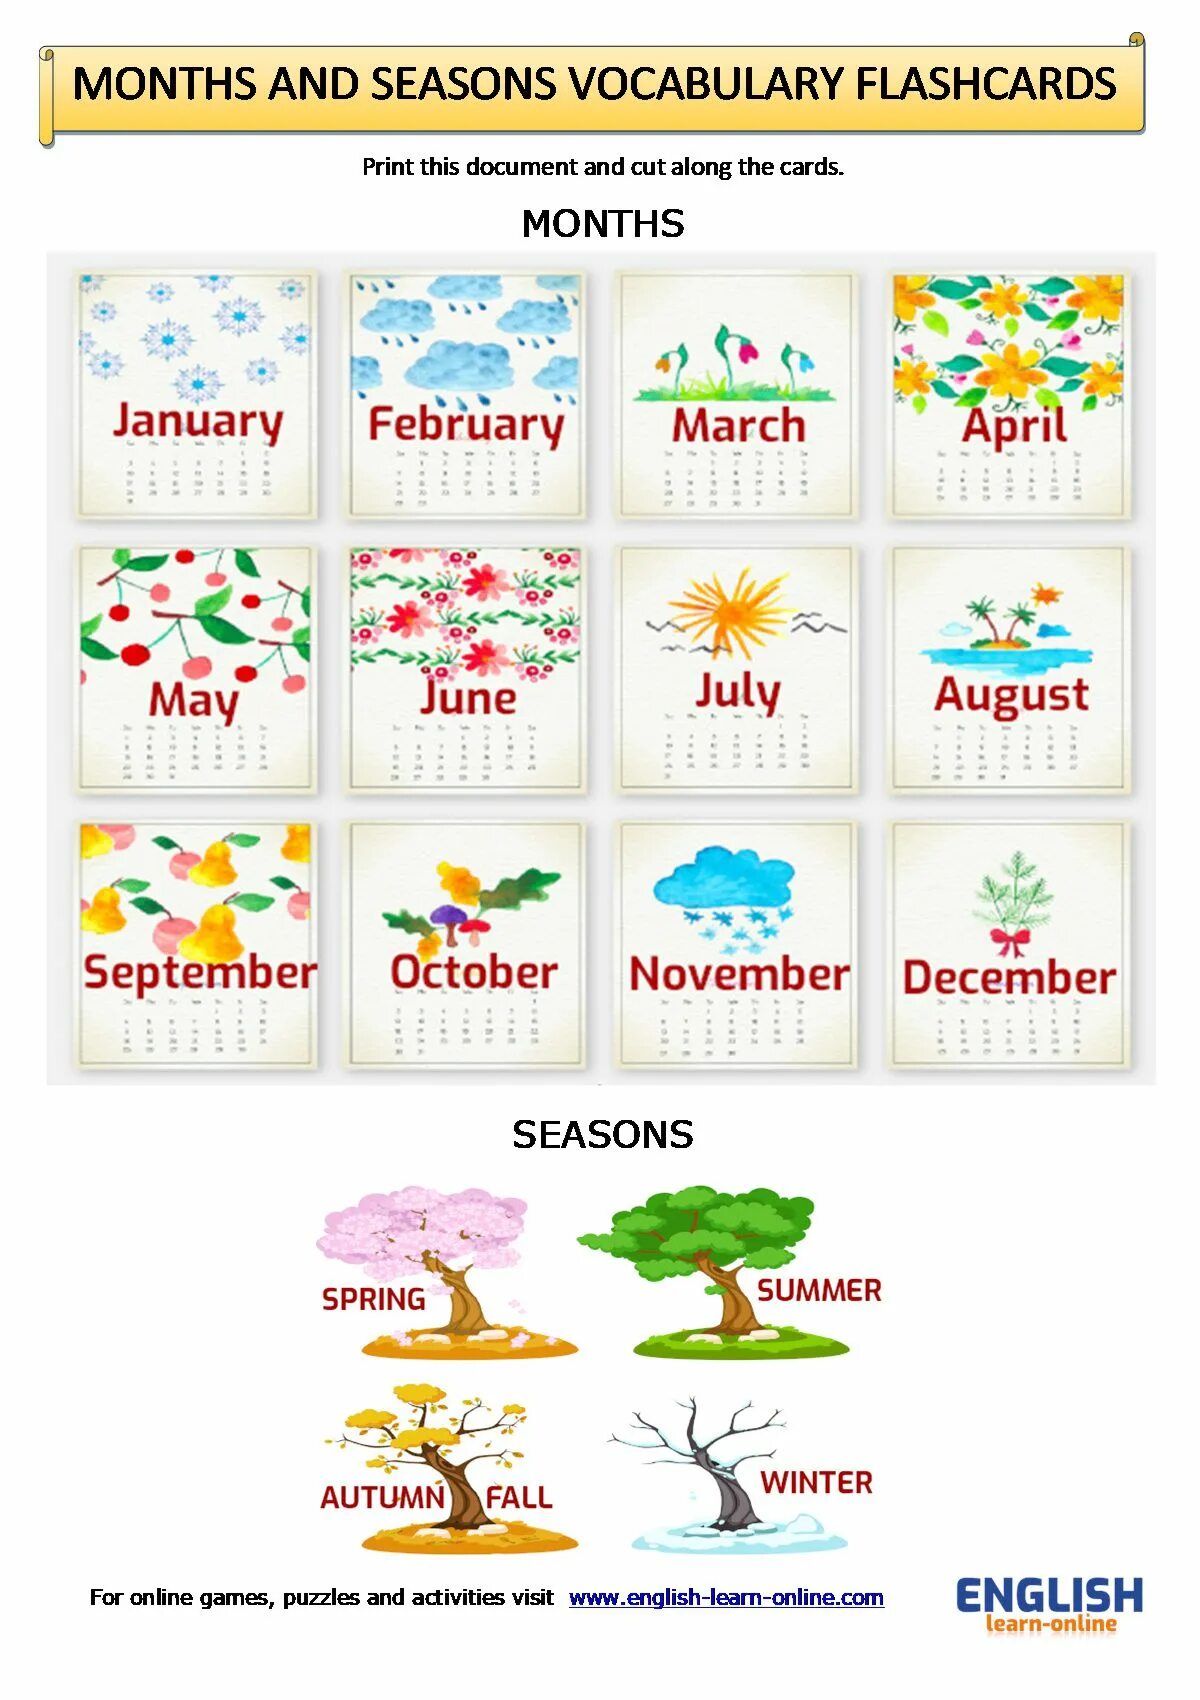 Seasons and months задания. Months of the year and Seasons. Days months and Seasons in English. Months of the year ин Seasons. Seasons months of the year